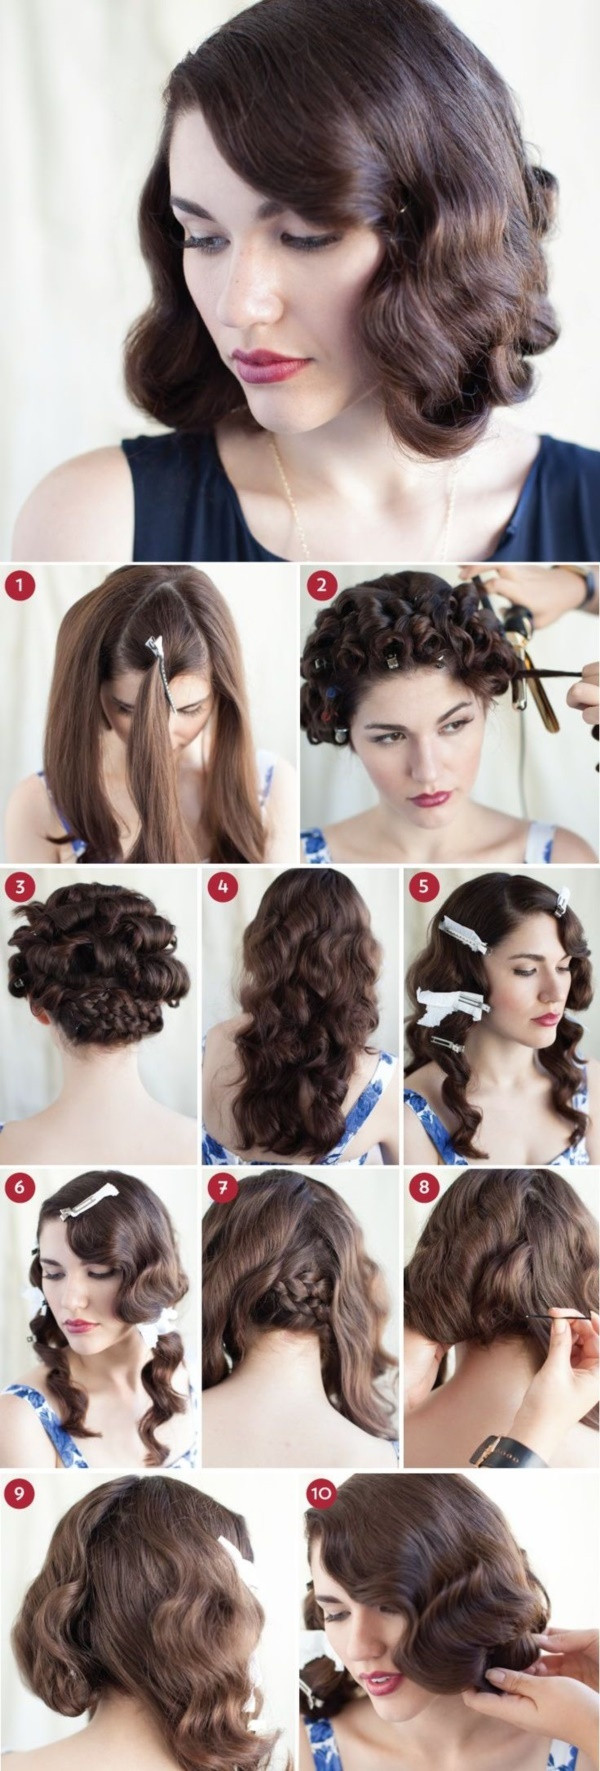 DIY Long Hairstyles
 101 Easy DIY Hairstyles for Medium and Long Hair to snatch